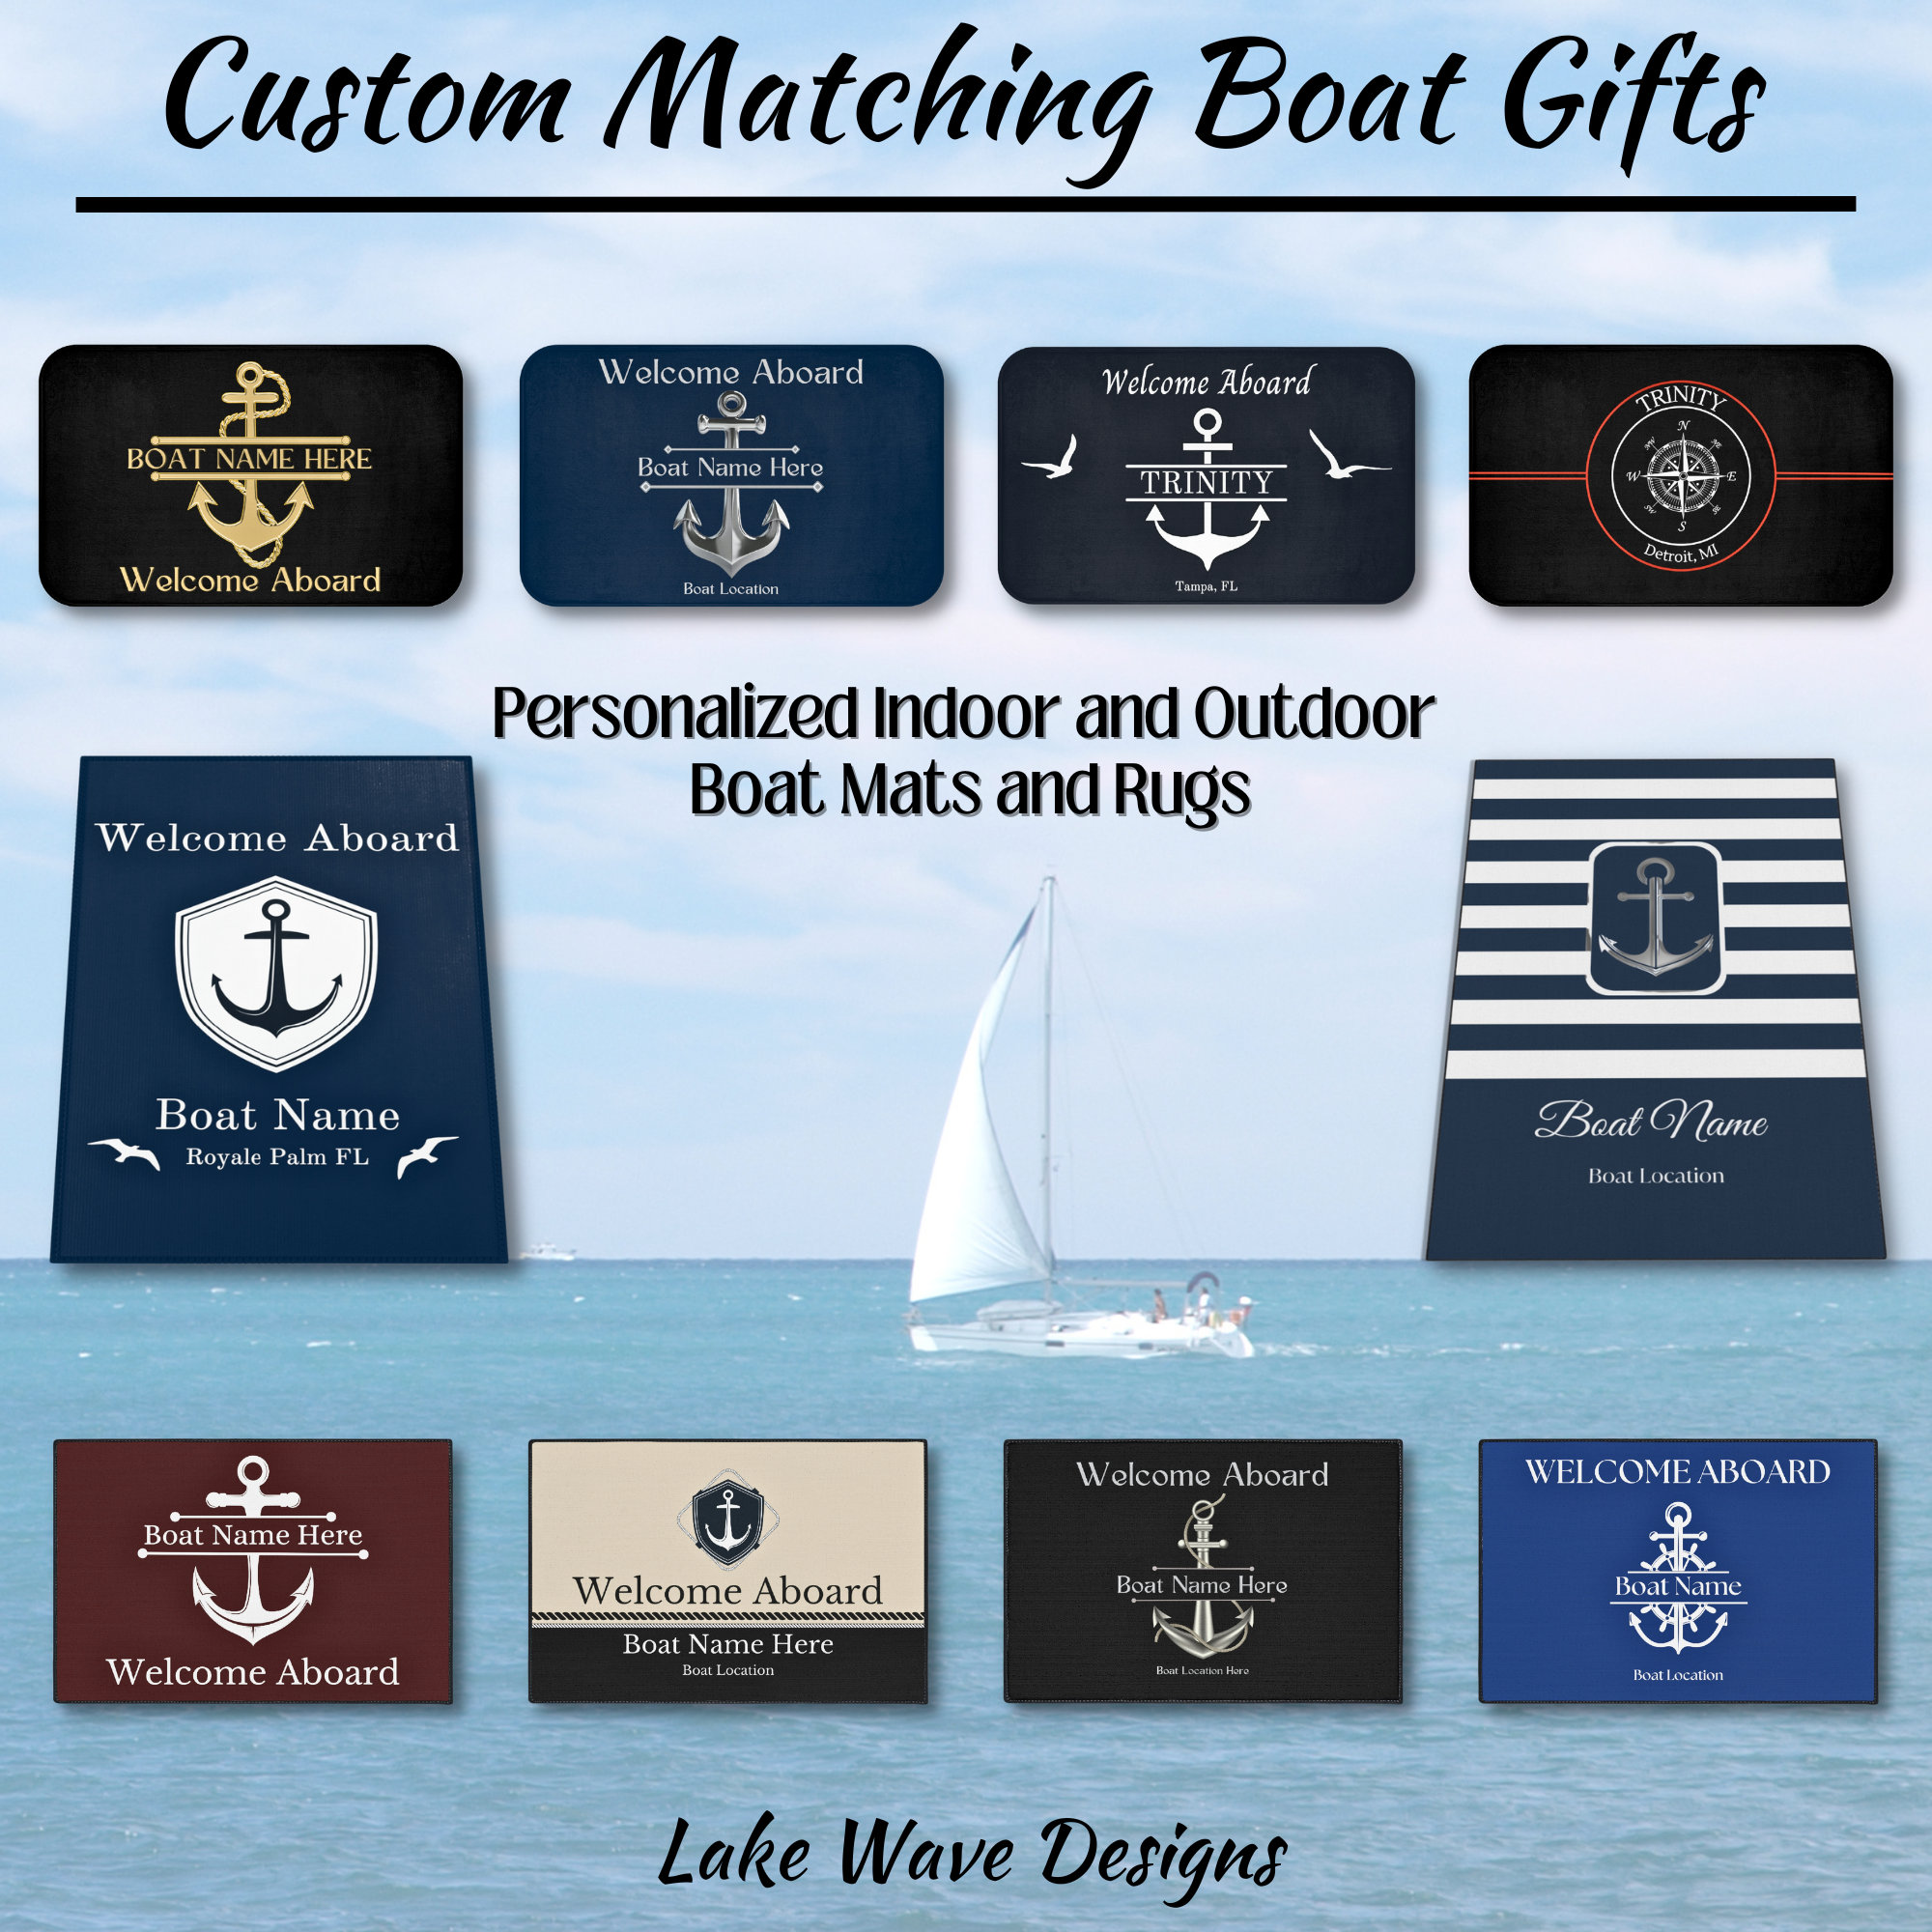 Custom Boat Mat, Boat Gifts Personalized, Boat Accessories